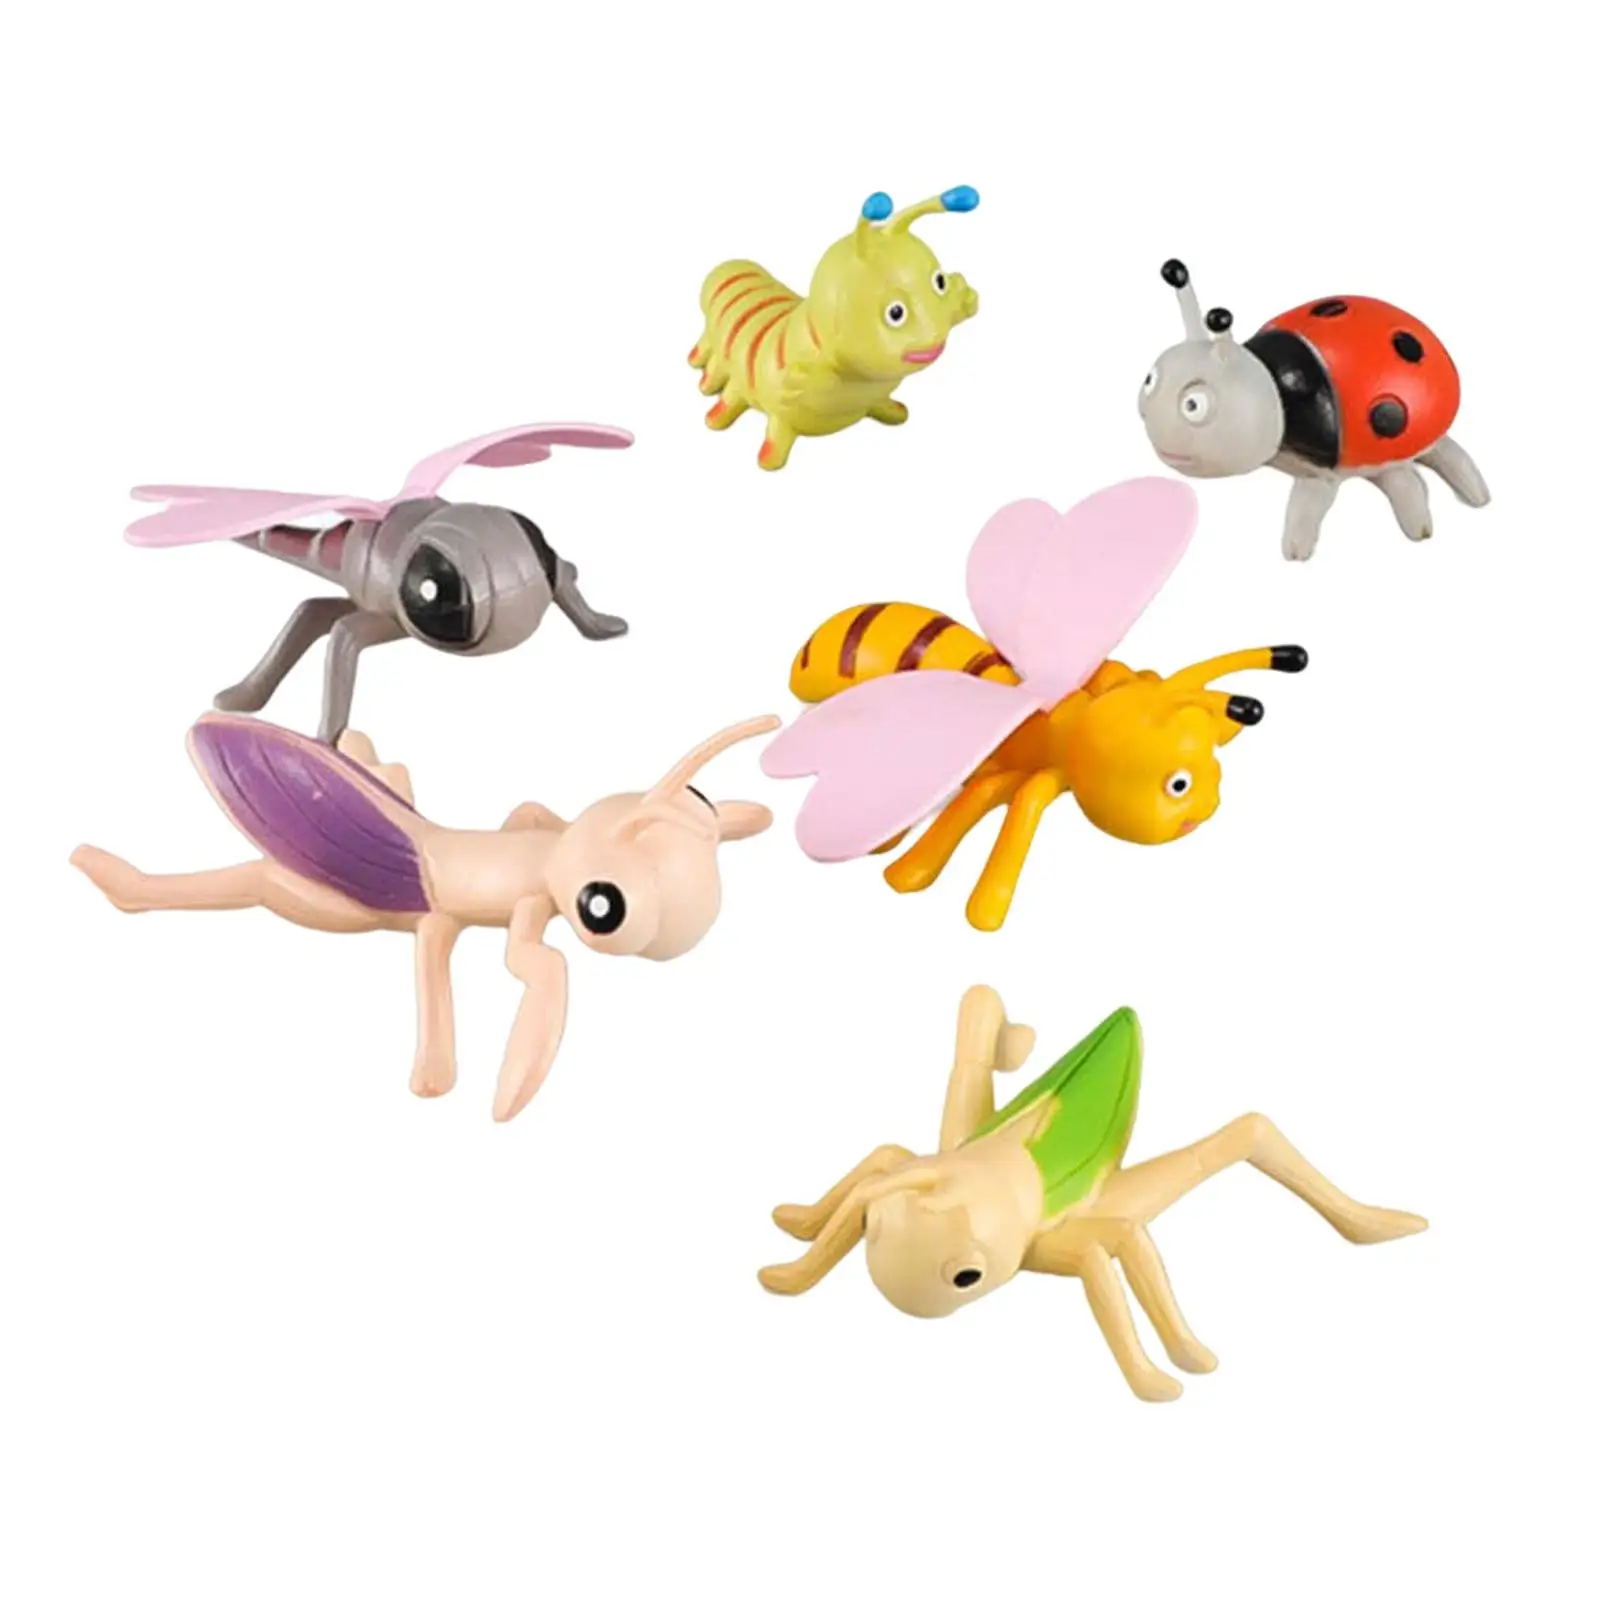 6 Pieces Artifical Animal Model Toy for Toddler Realistic Figures Birthday Gift Party Favors Tabletop Decors Simulation Durable